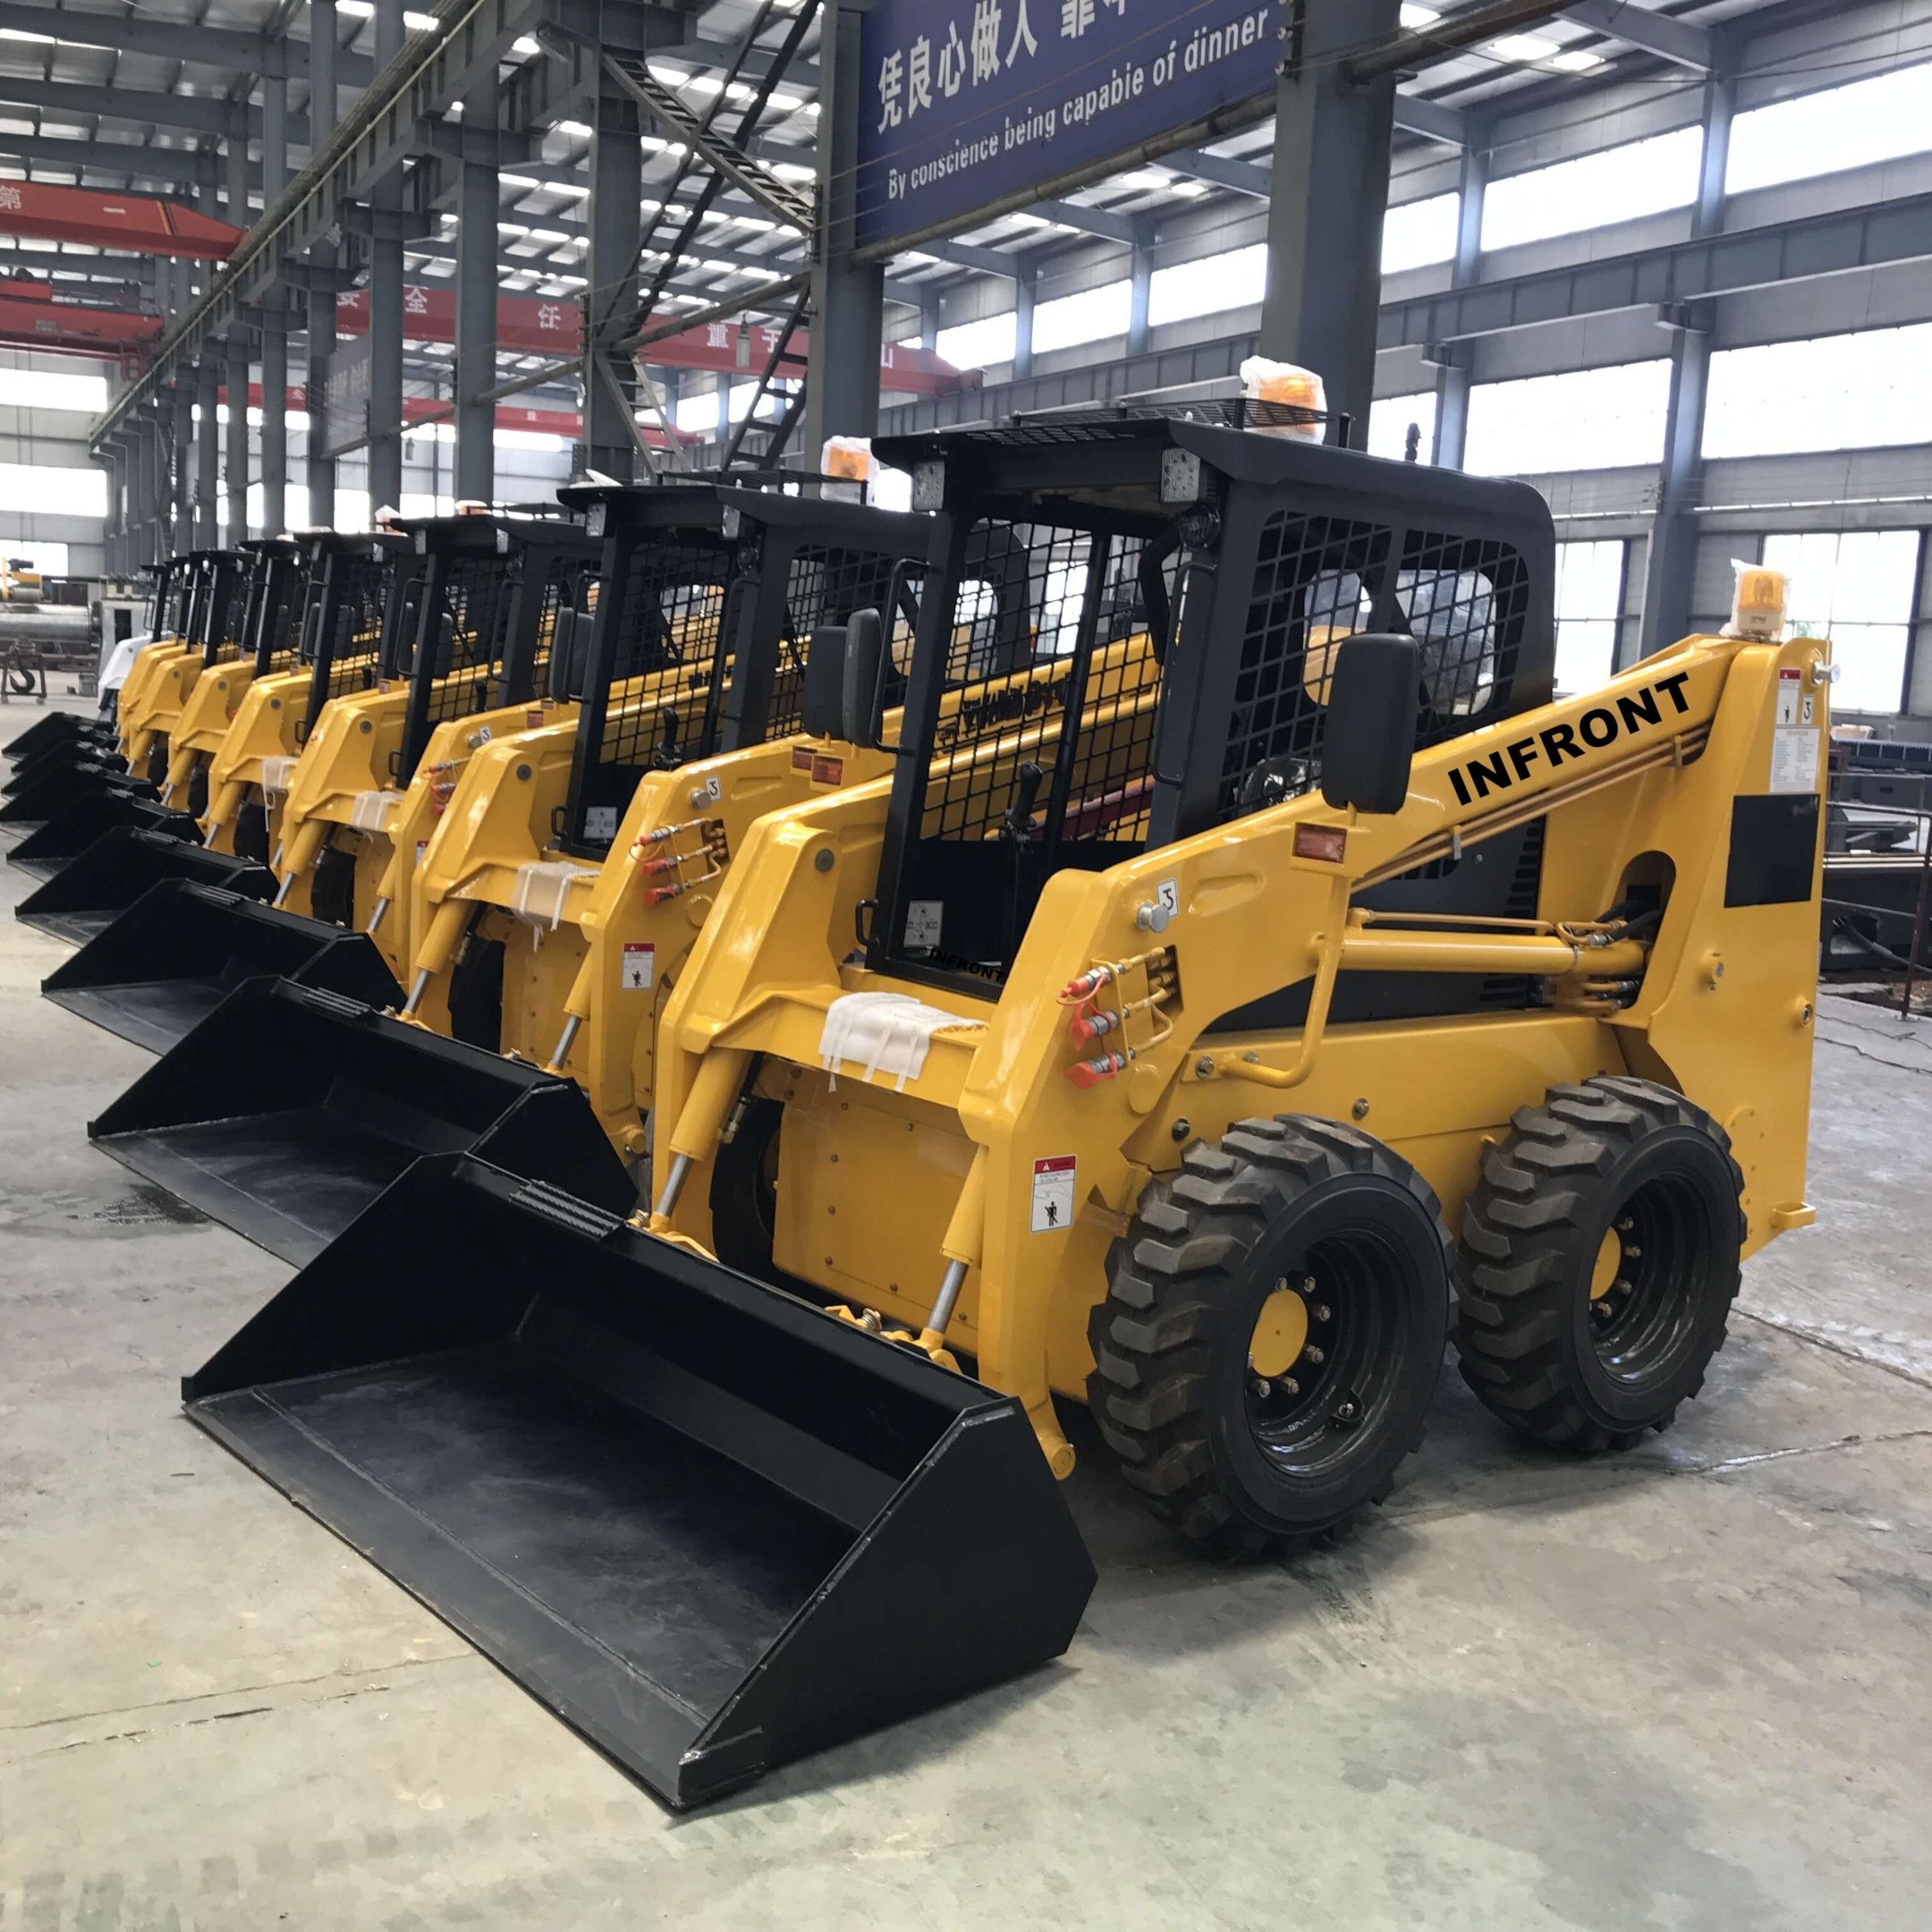 Photograph of Chinese mini skid steer loaders ready to work efficiently.